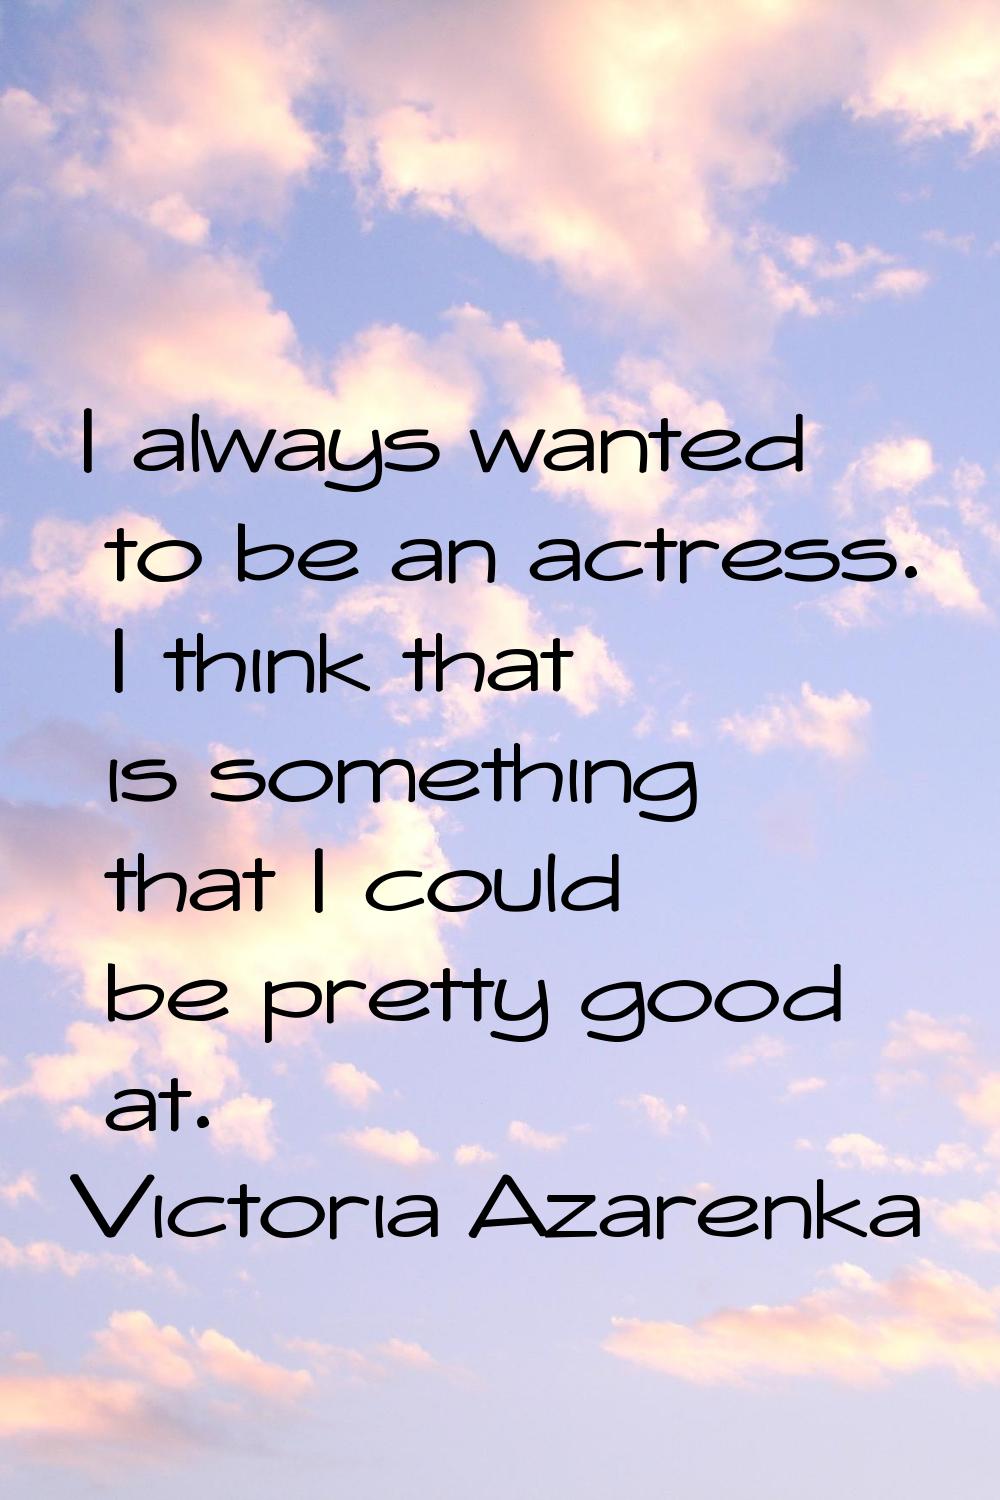 I always wanted to be an actress. I think that is something that I could be pretty good at.